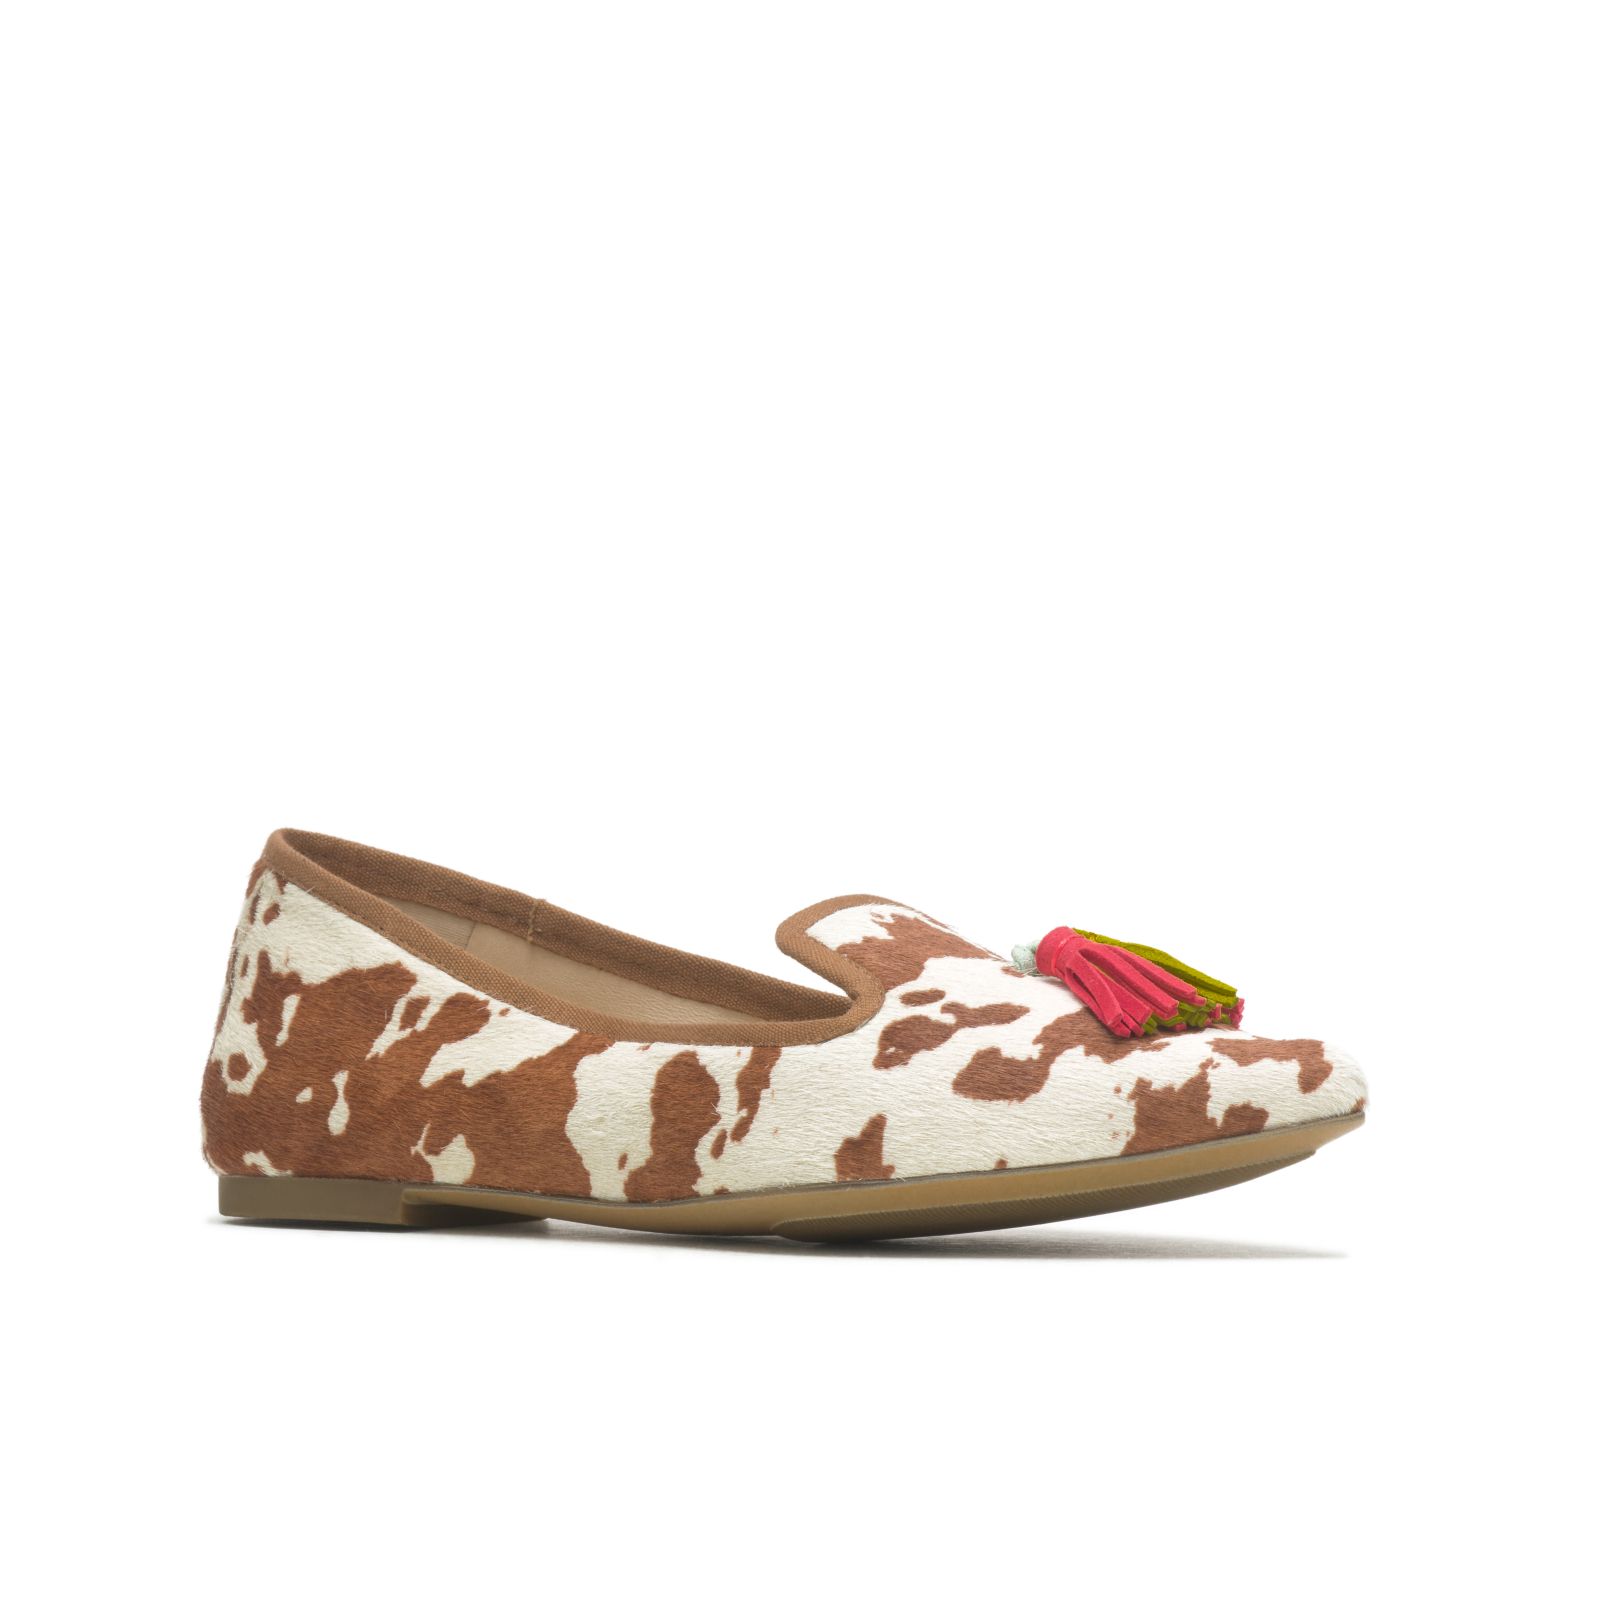 Loafers Hush Puppies Sadie Tassel 2 Mujer Cow Print Leather | SMLXWJZ-95